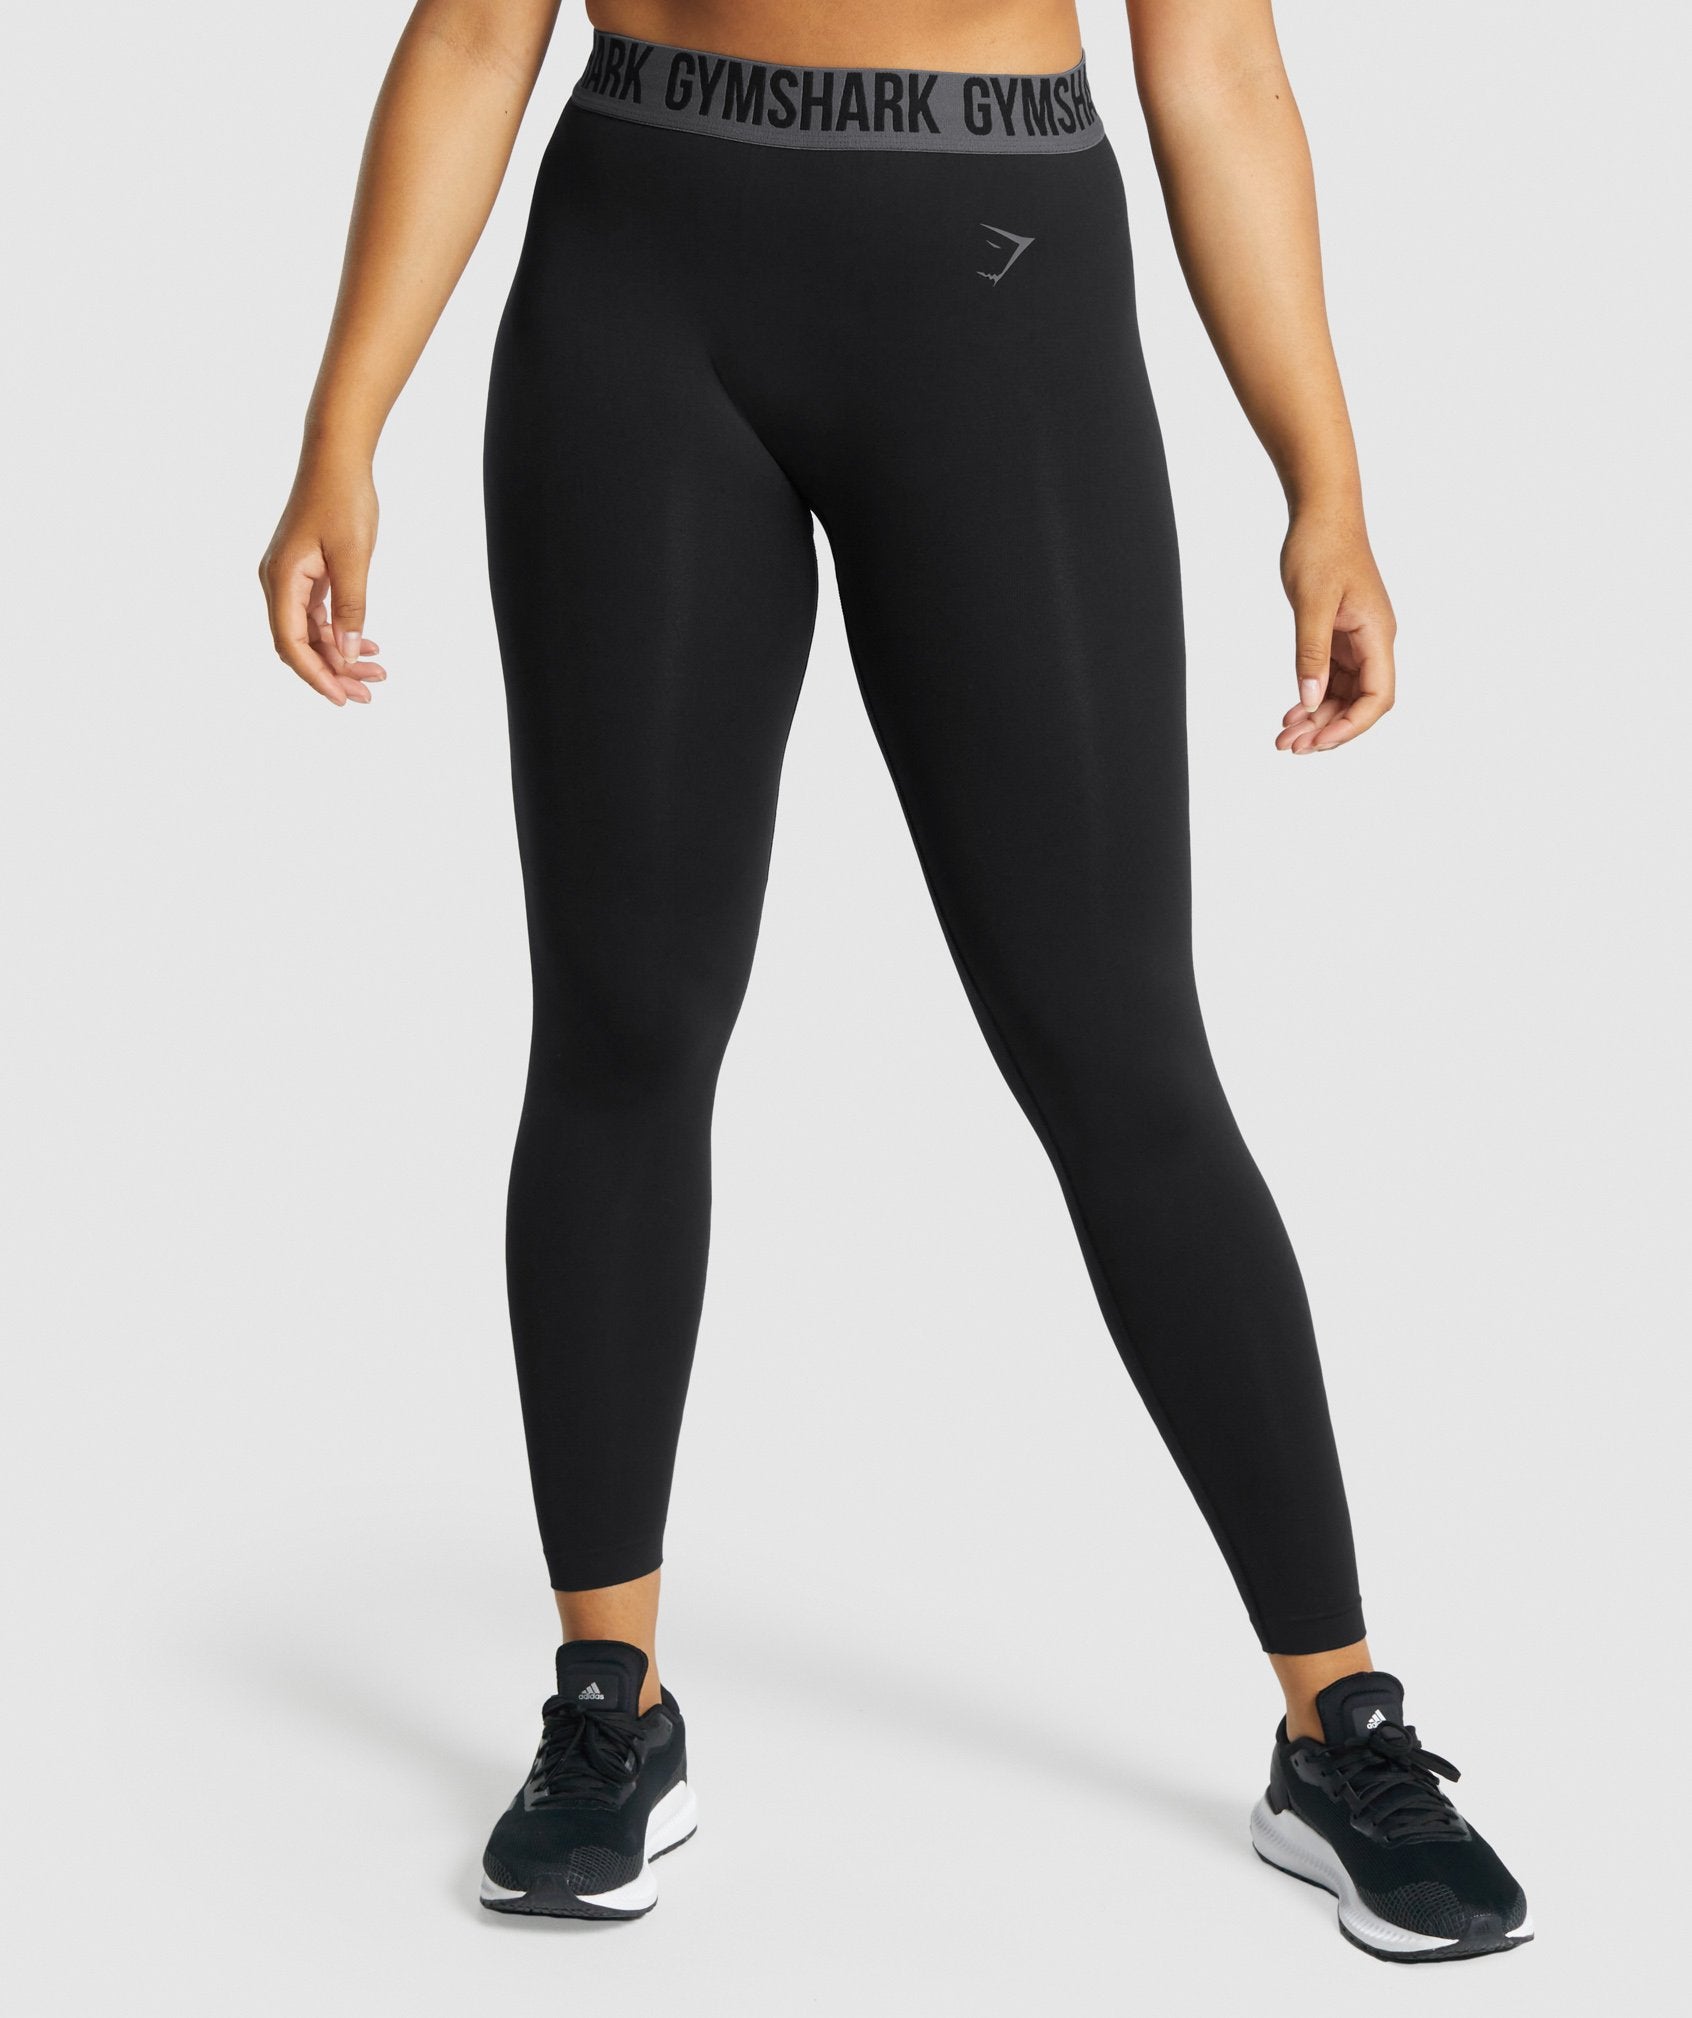 Gymshark FIT SEAMLESS LEGGINGS Size Small Black and White - $27